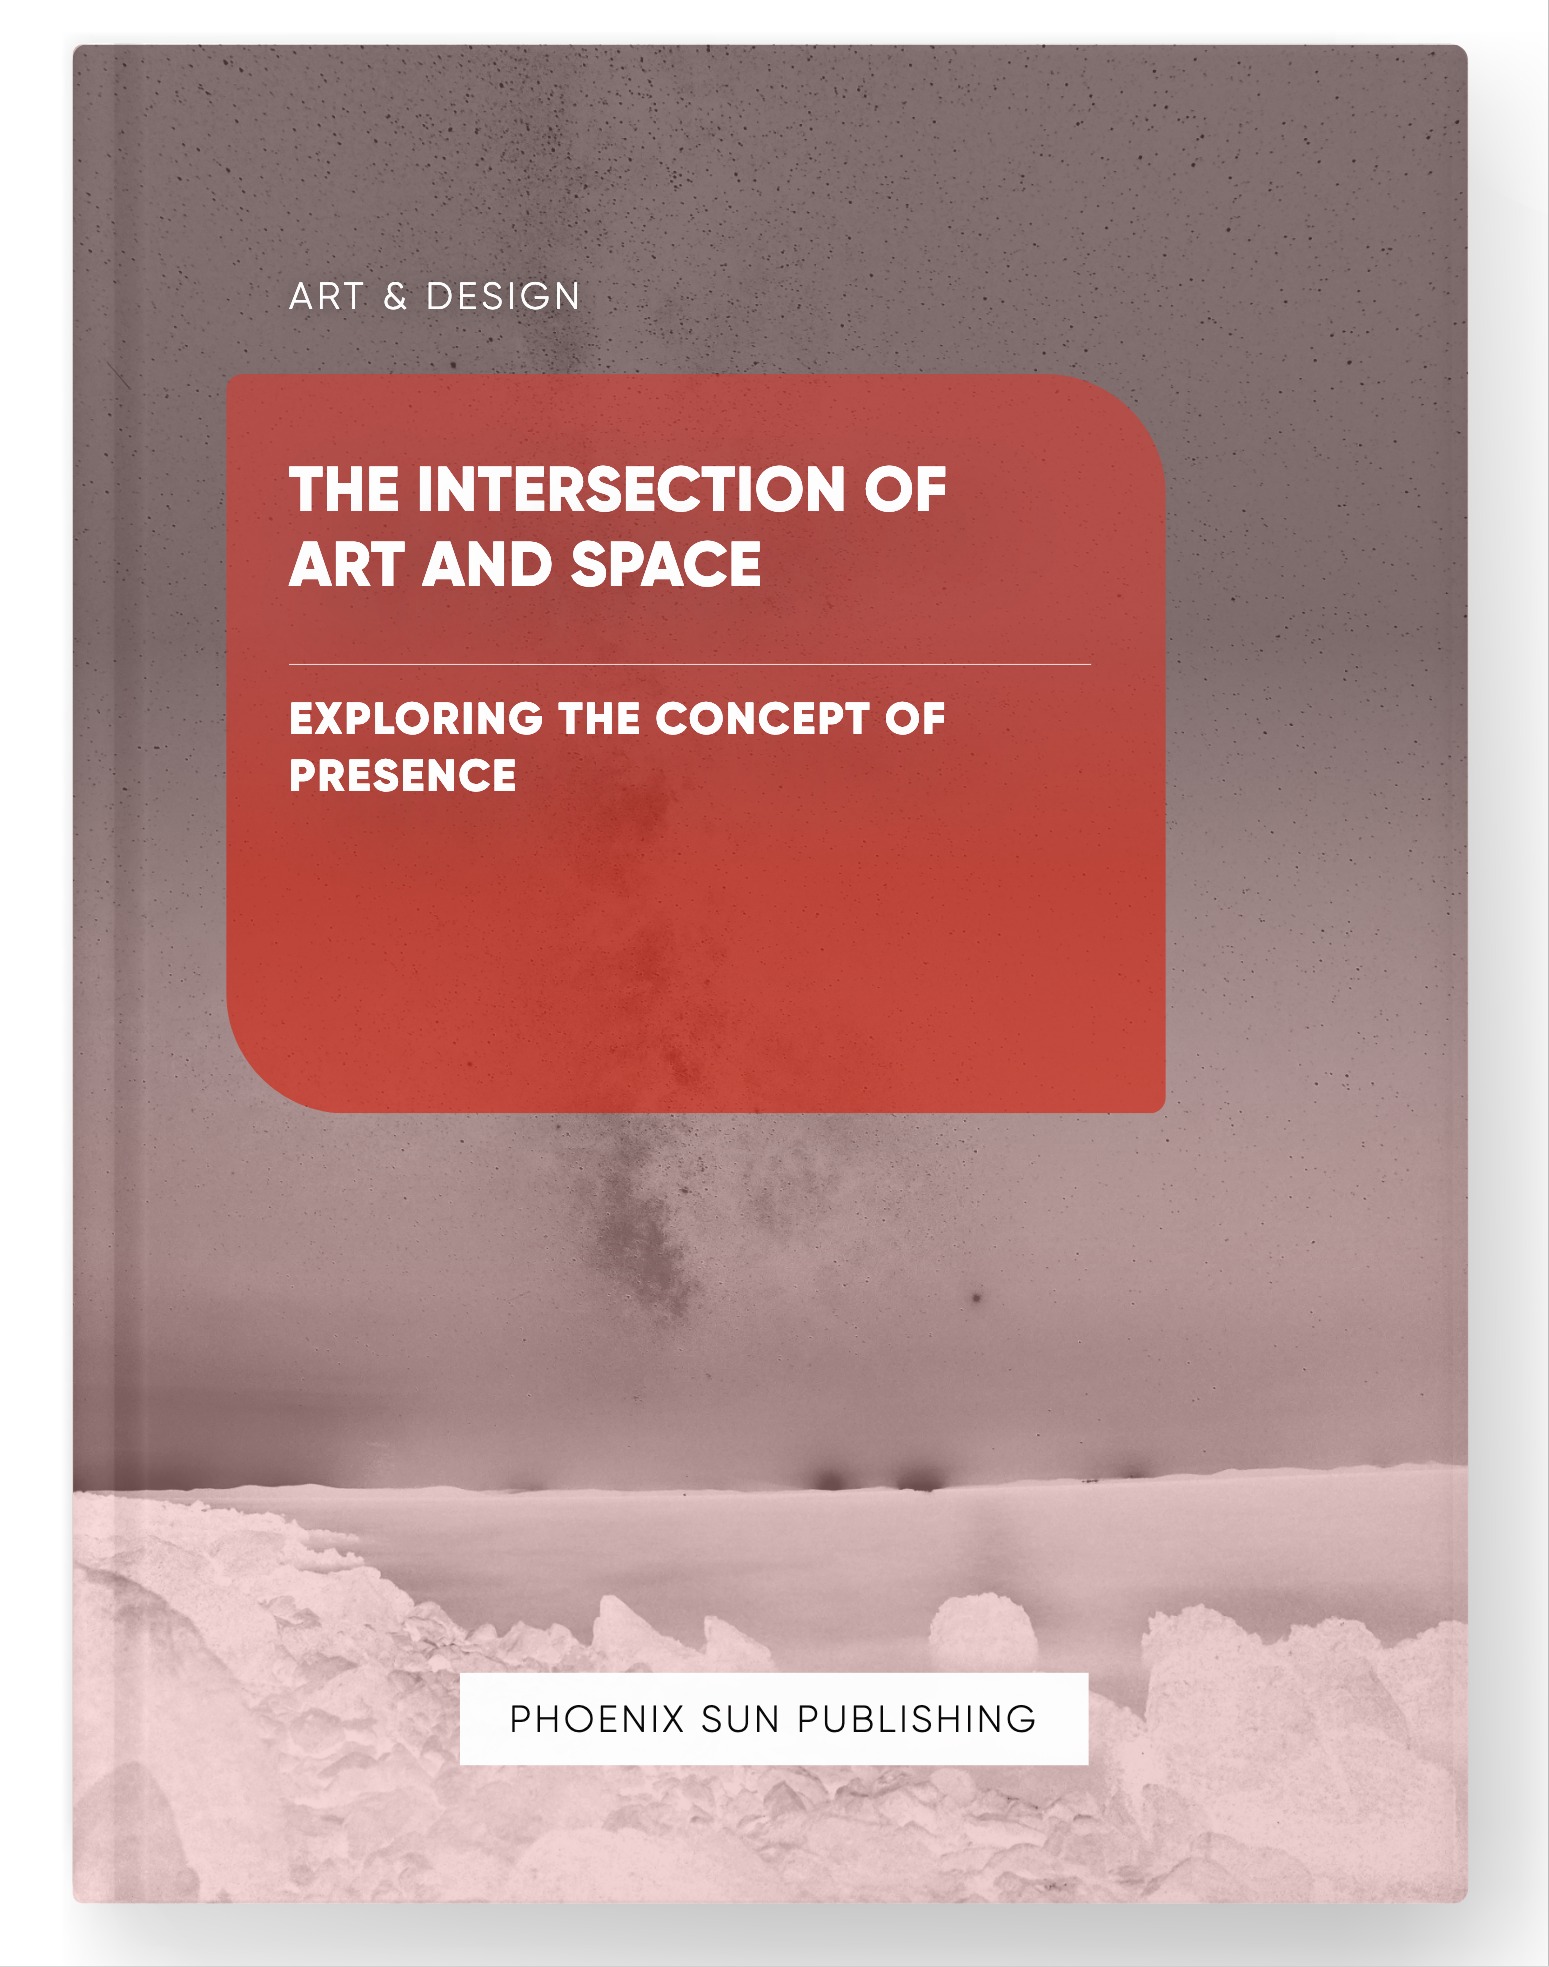 The Intersection of Art and Space – Exploring the Concept of Presence